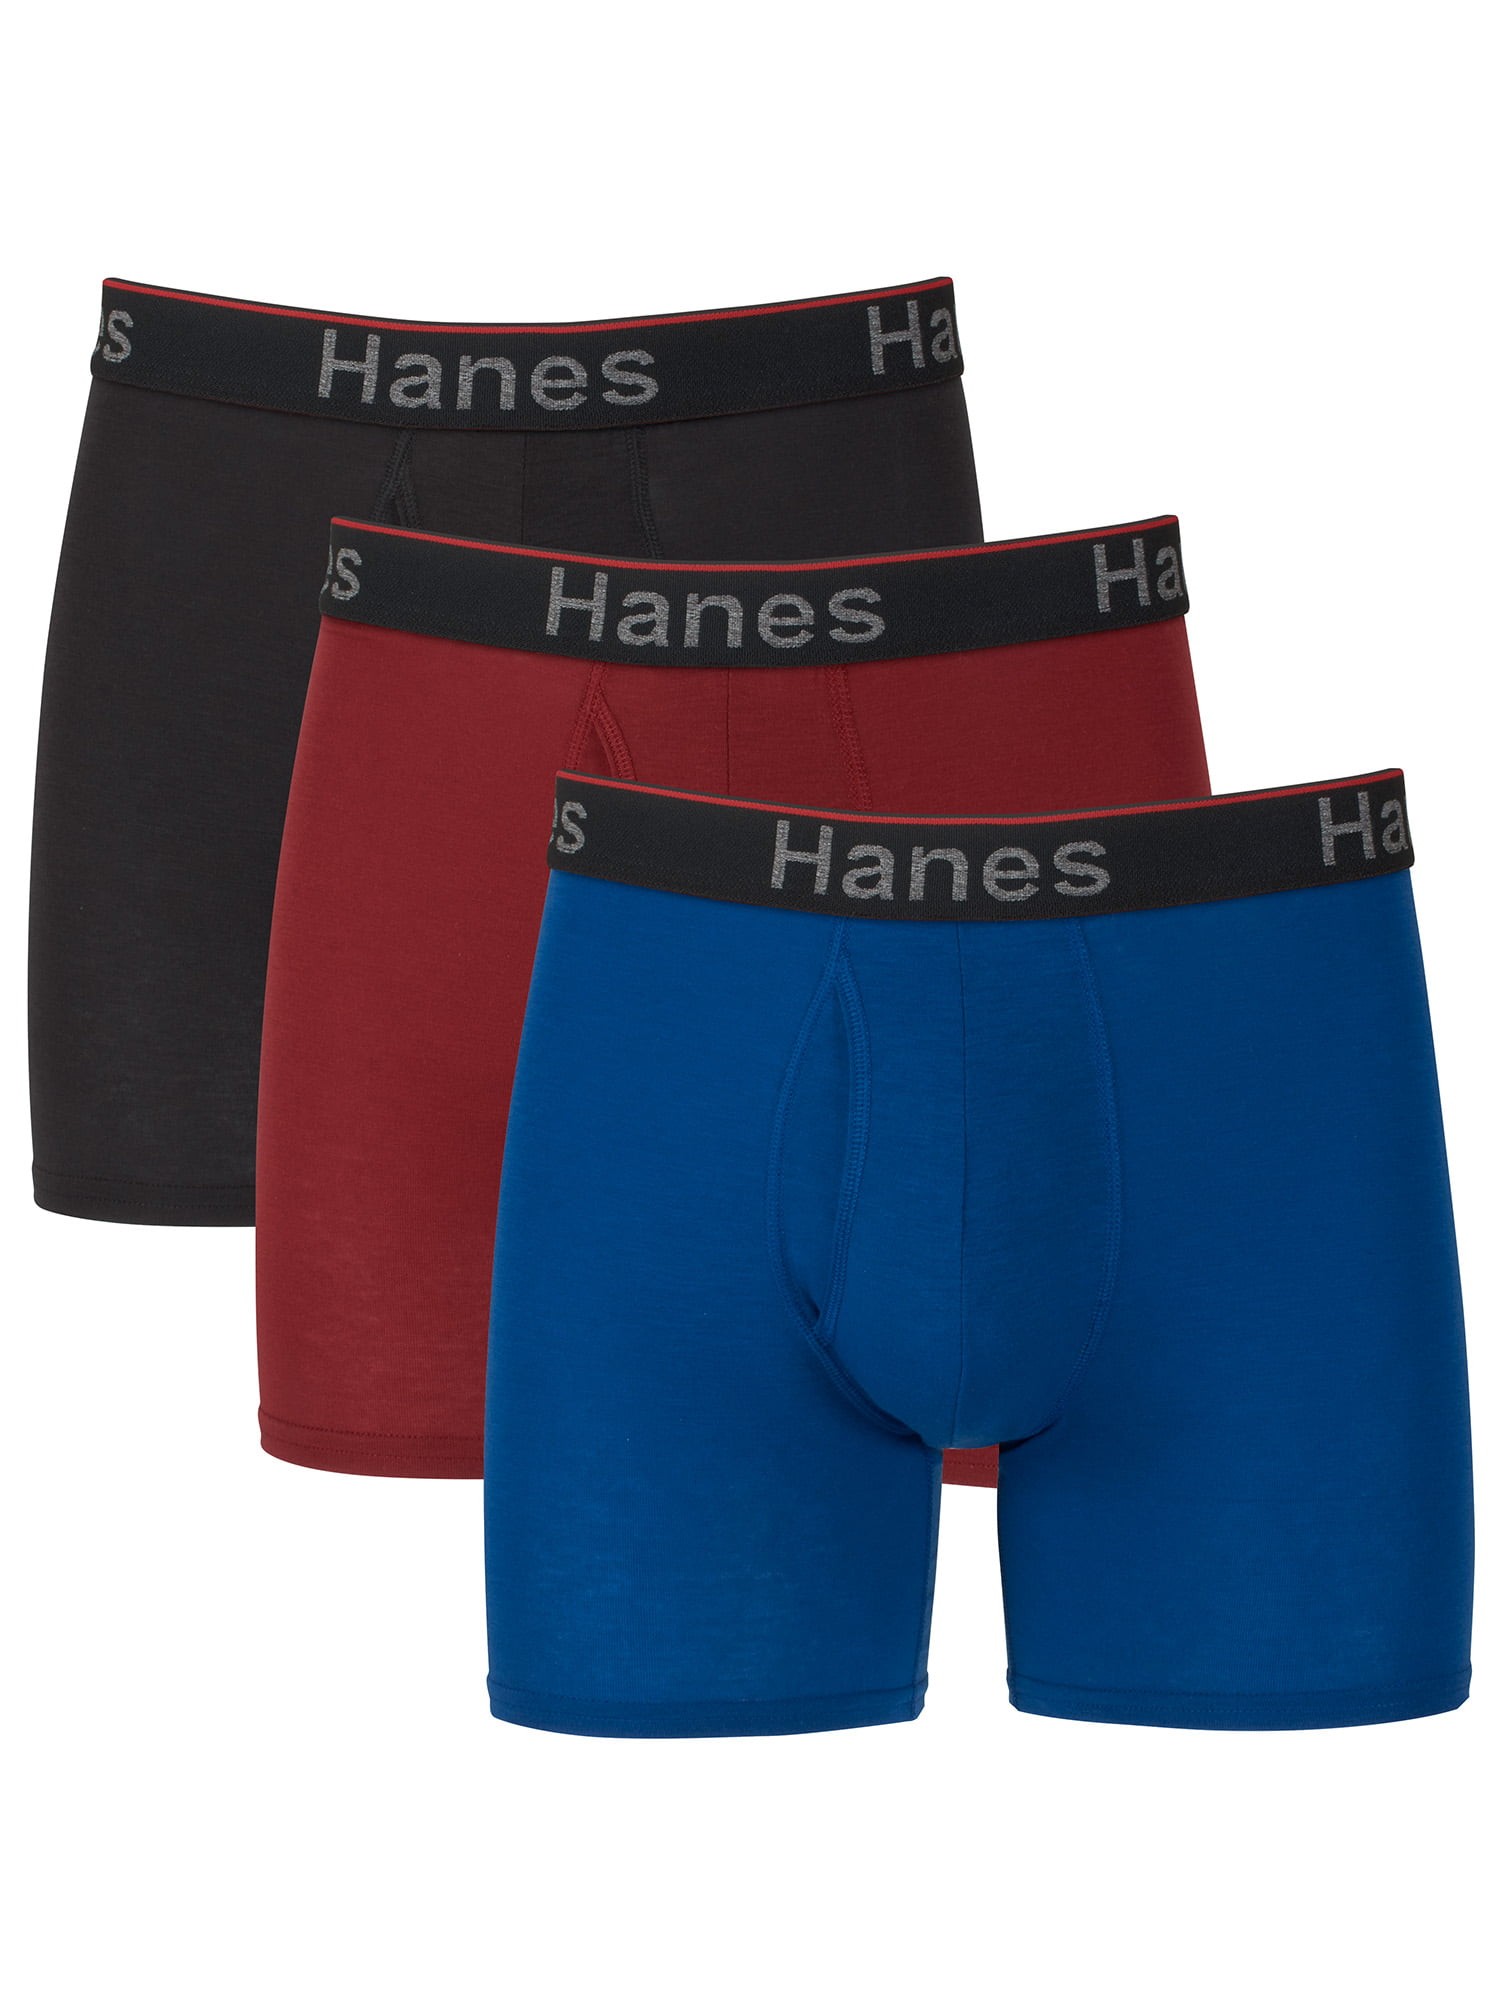 Hanes Premium Men's 3pk Trunks With Anti Chafing Total Support